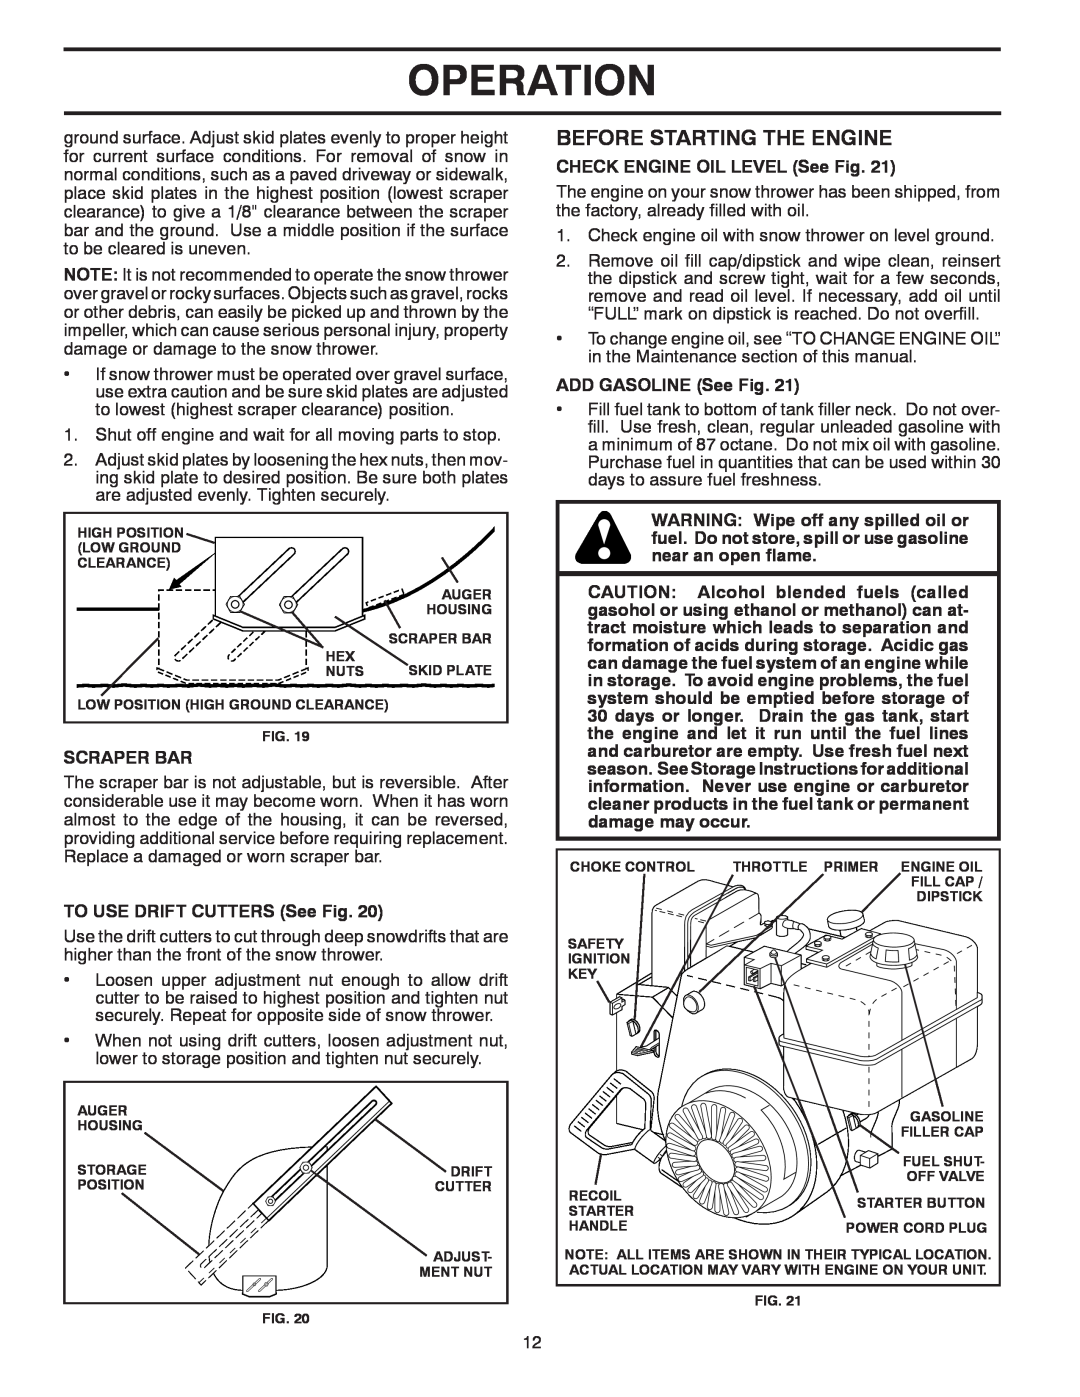 Poulan 96192001901, 415153 owner manual Before Starting The Engine, Operation, Scraper Bar, CHECK ENGINE OIL LEVEL See Fig 